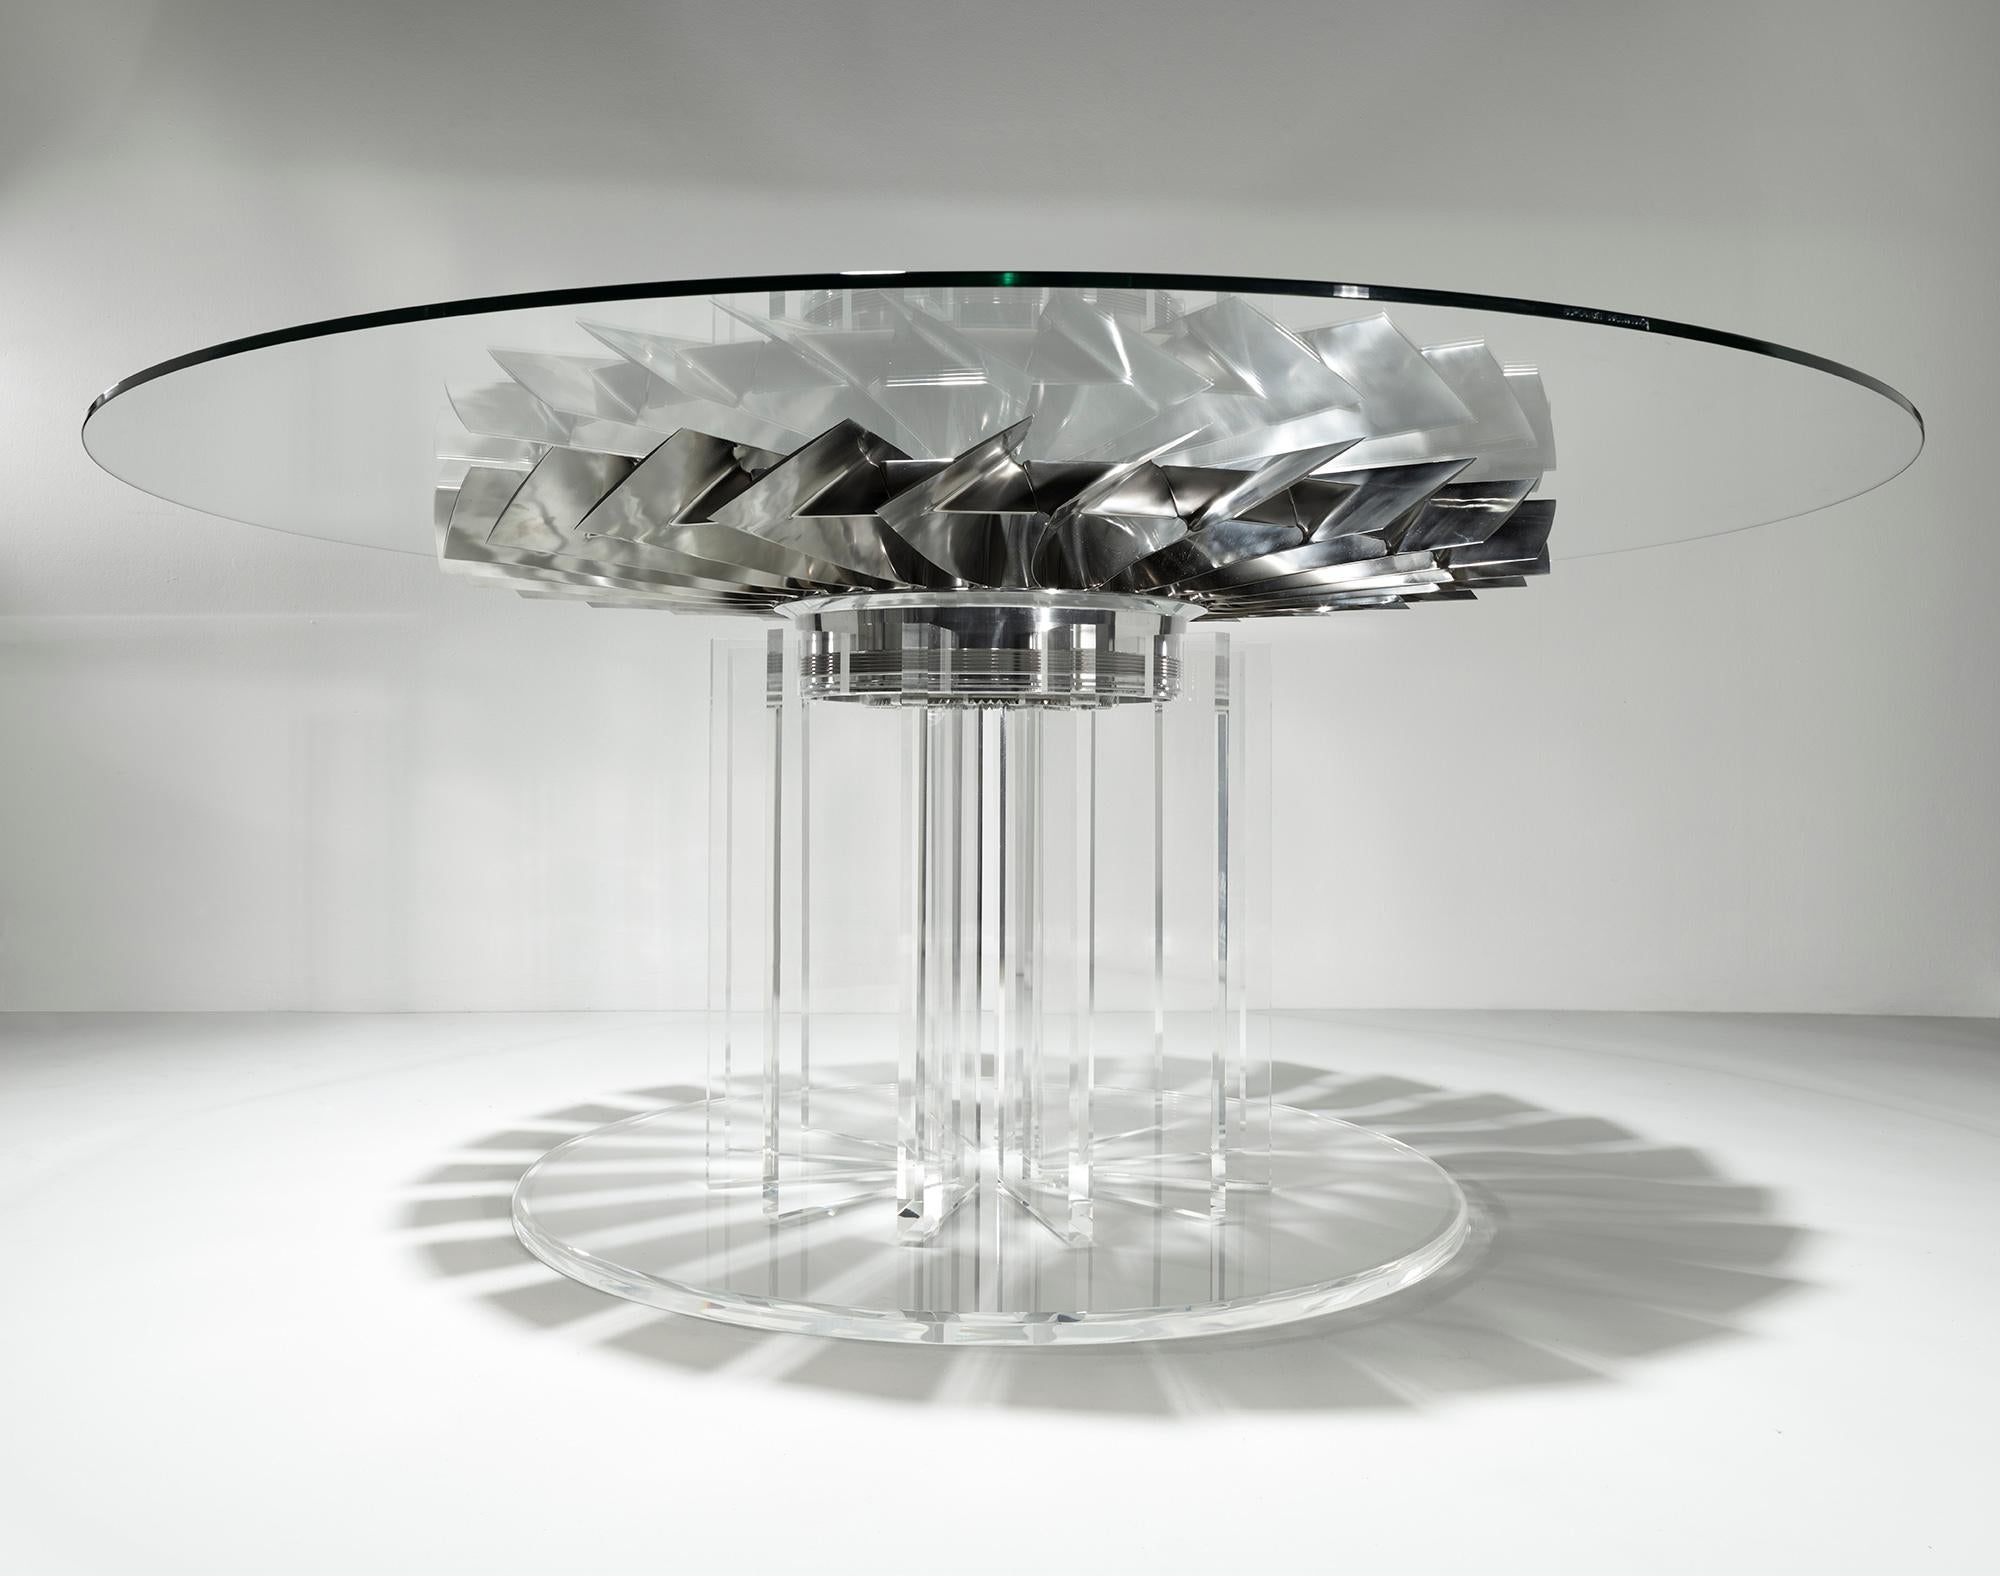 Absolutely beautiful dining table with 26 individually polished titanium blades, positioned on top of a bespoke Perspex base, underneath glass. A very unique statement piece.

The fan used in making this table is from a Rolls Royce Pegasus Sea